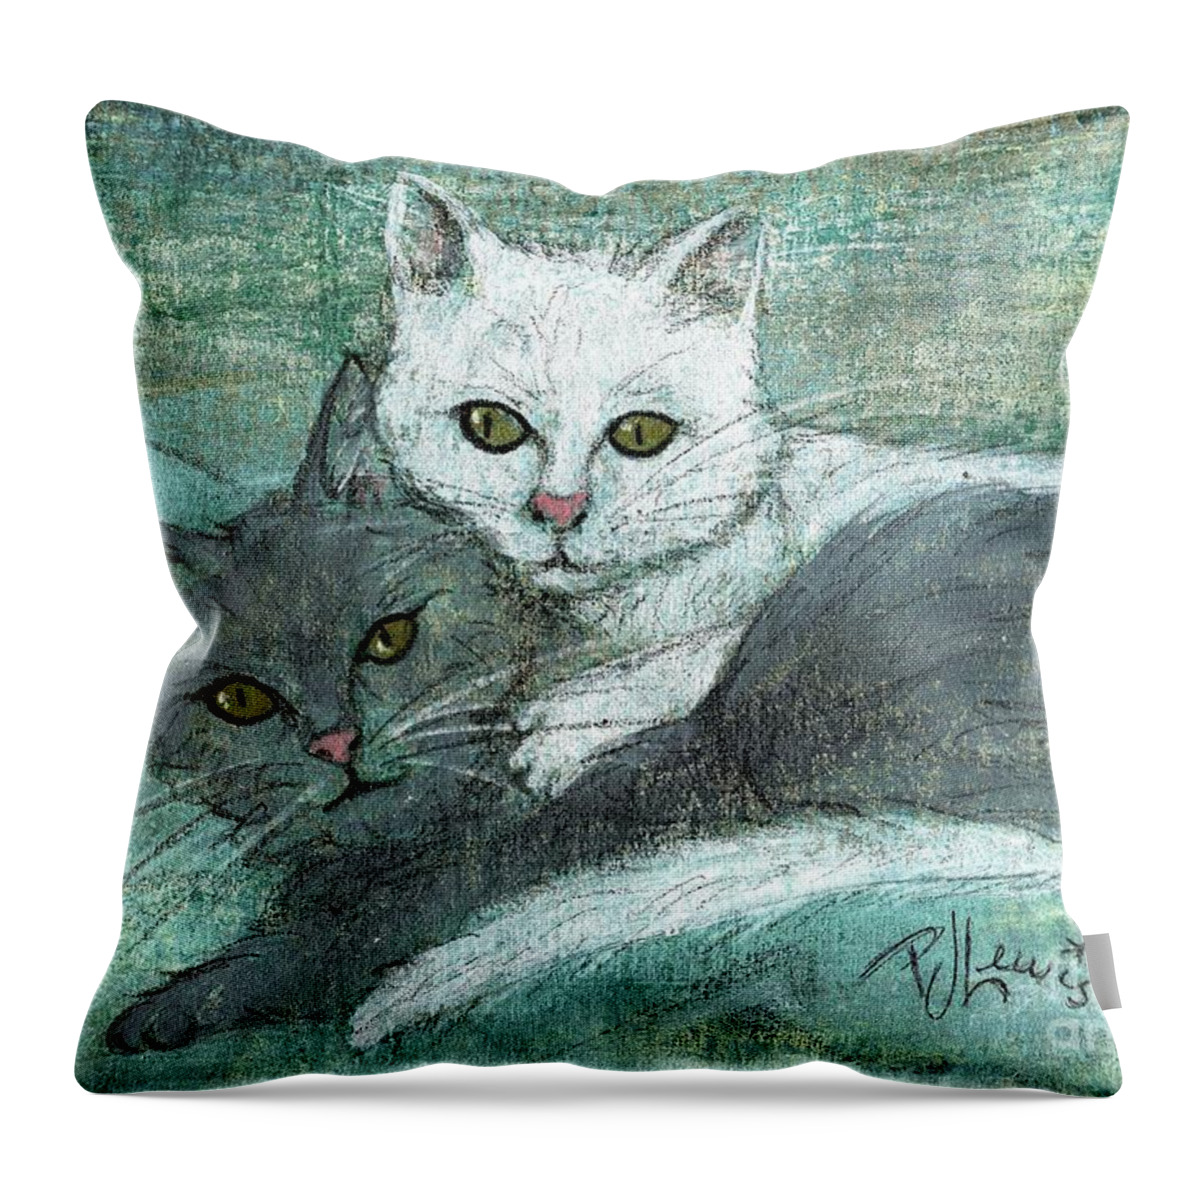 Cats Throw Pillow featuring the painting Buddies by PJ Lewis